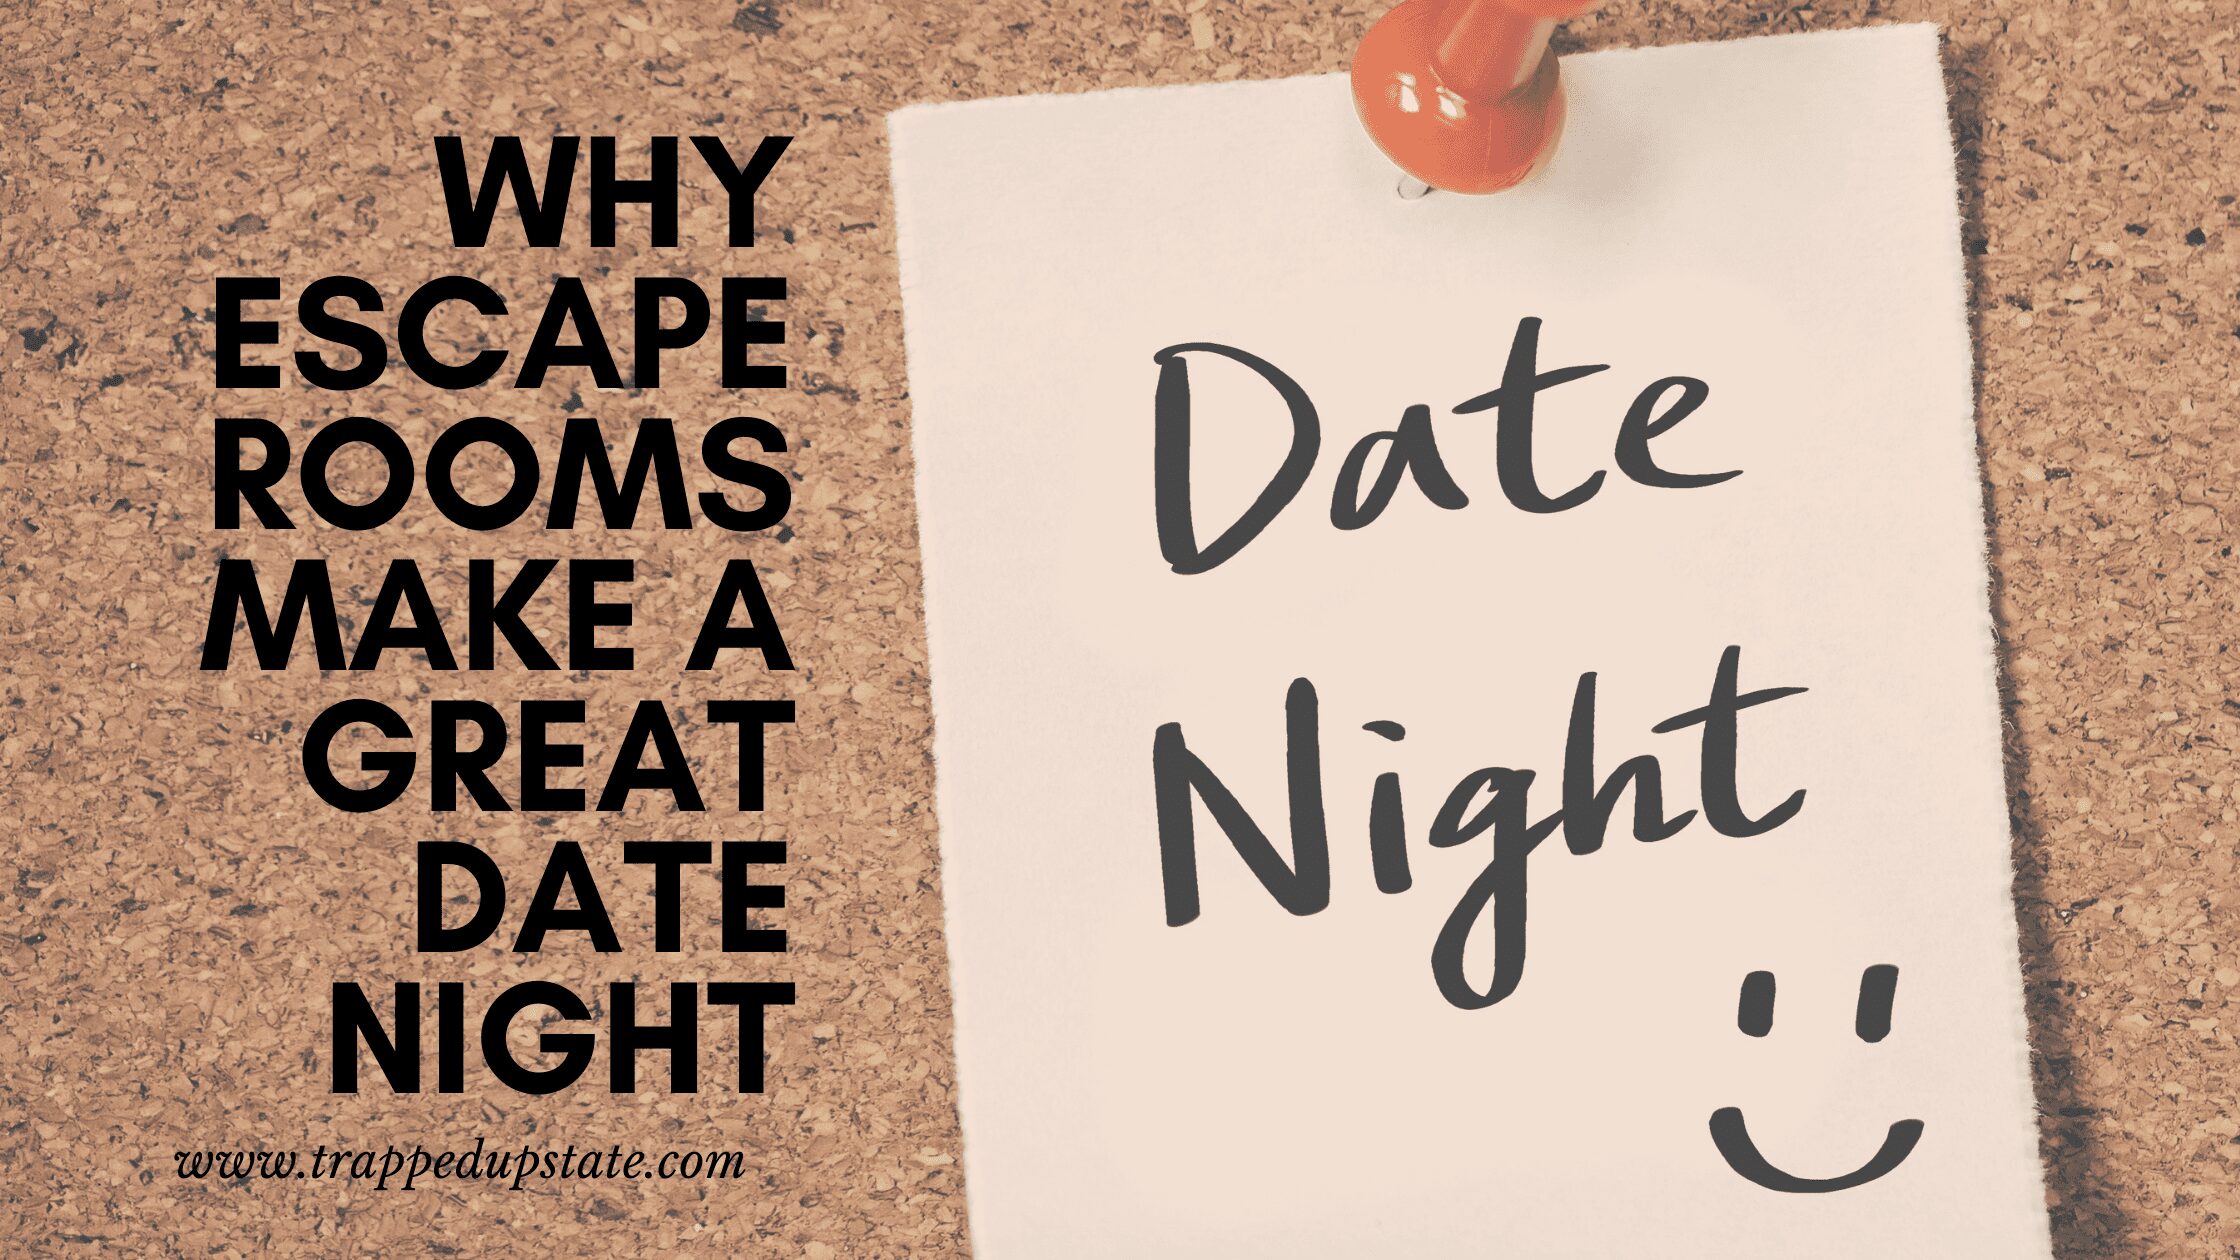 Why Escape Room Games Make a Great Date Night